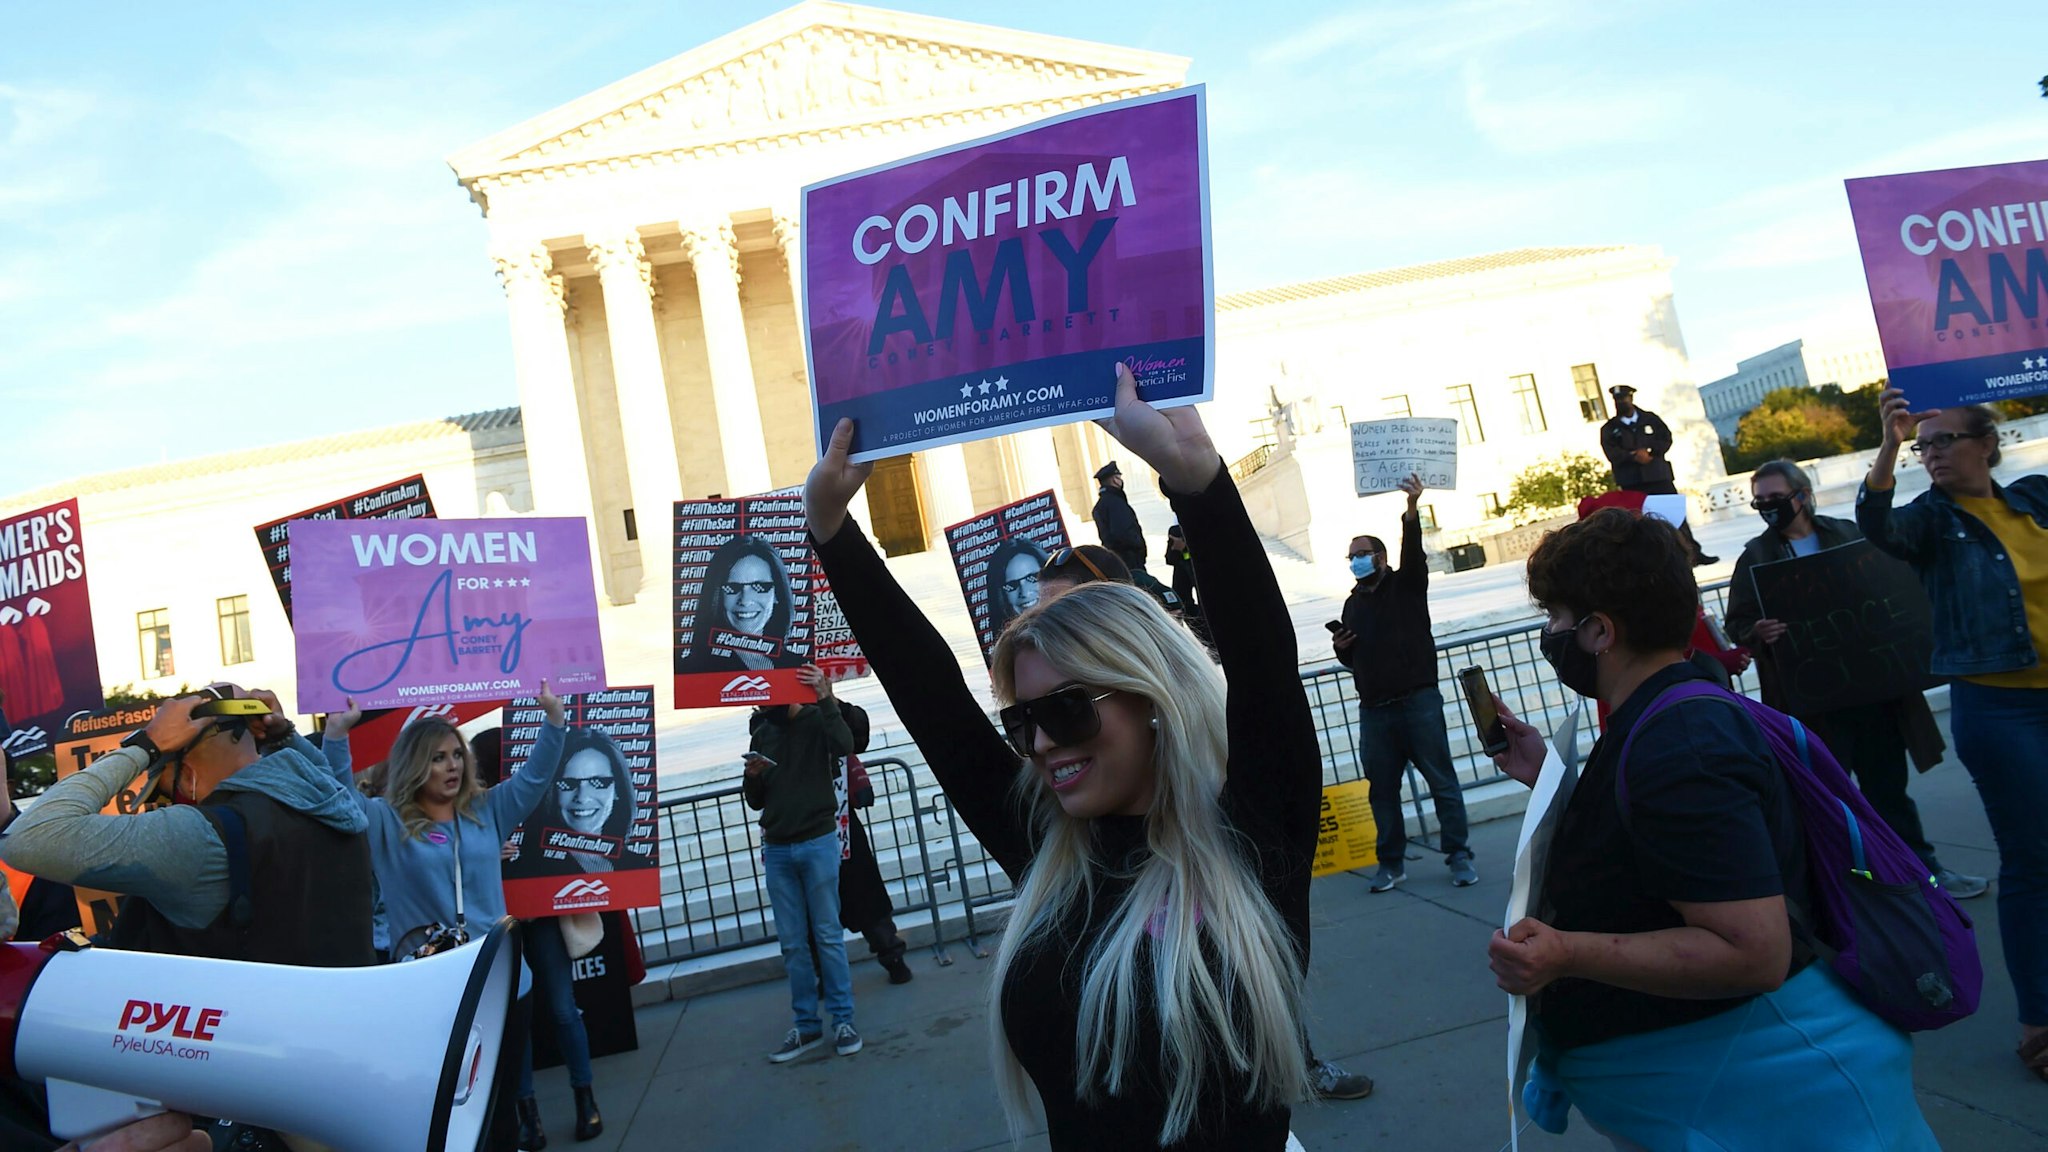 Supporters of Judge Amy Coney Barrett and pro-choice supporters gather outside of the US Supreme Court as the Senate is expected to confirm President Trump's Supreme Court nominee Amy Coney Barrett on Capitol Hill on October 26, 2020 in Washington, DC.